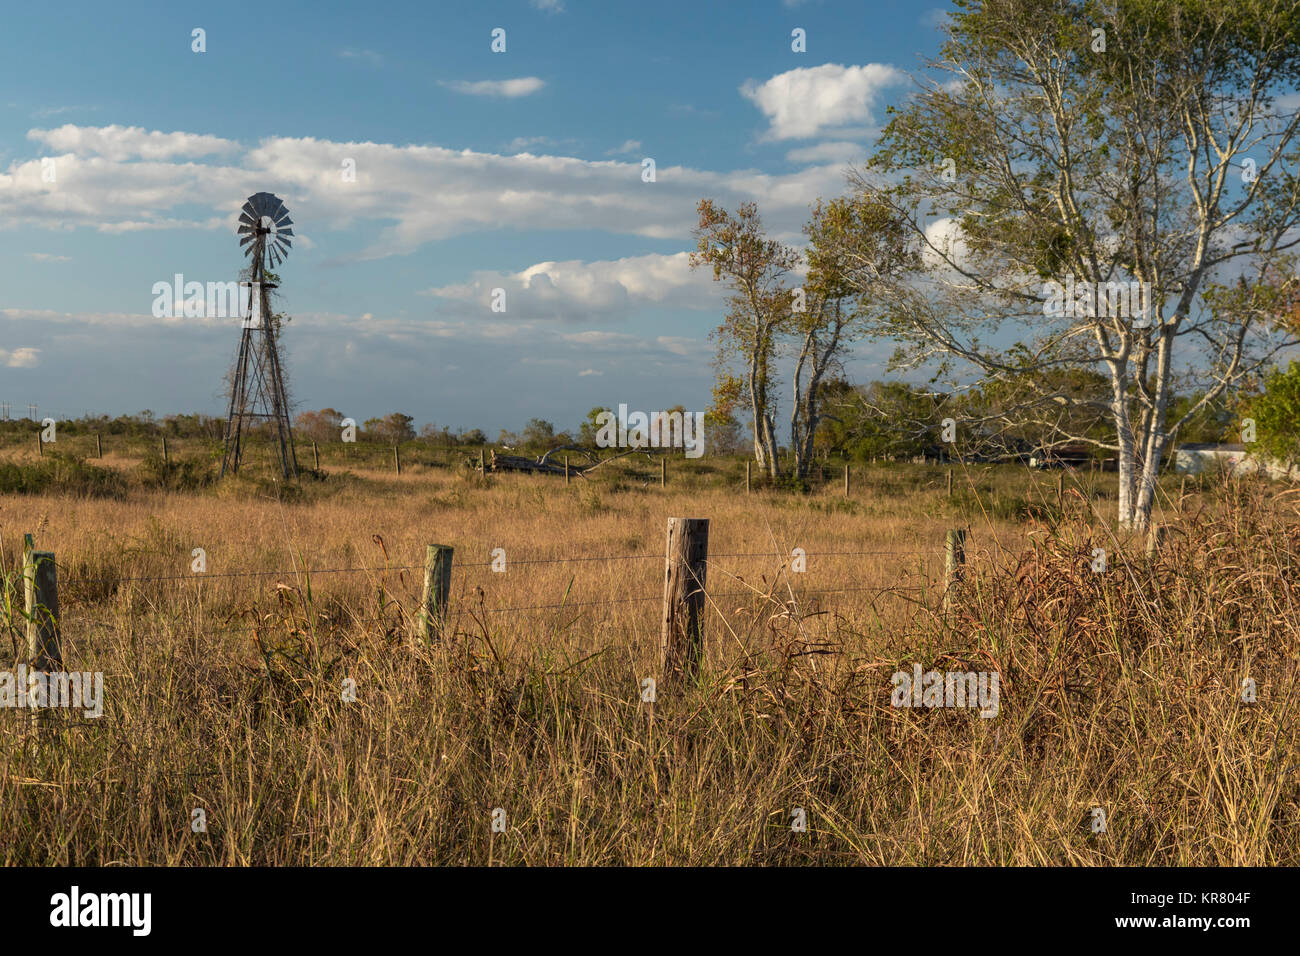 Wadsworth, Texas - A windmill in a field near the Bulf of Mexico. Stock Photo